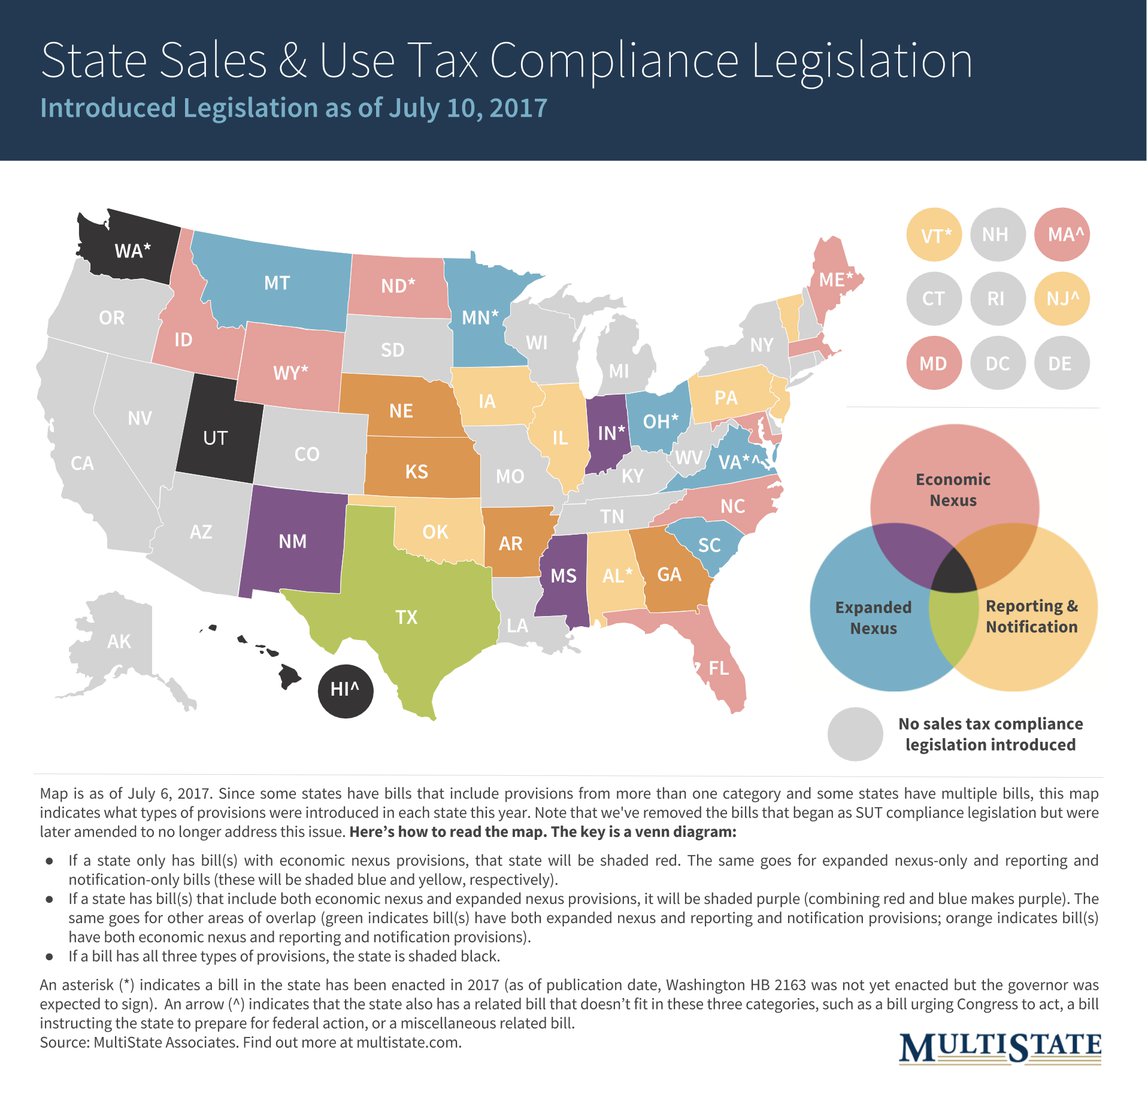 Map of State Sales & Use Tax Compliance Legislation